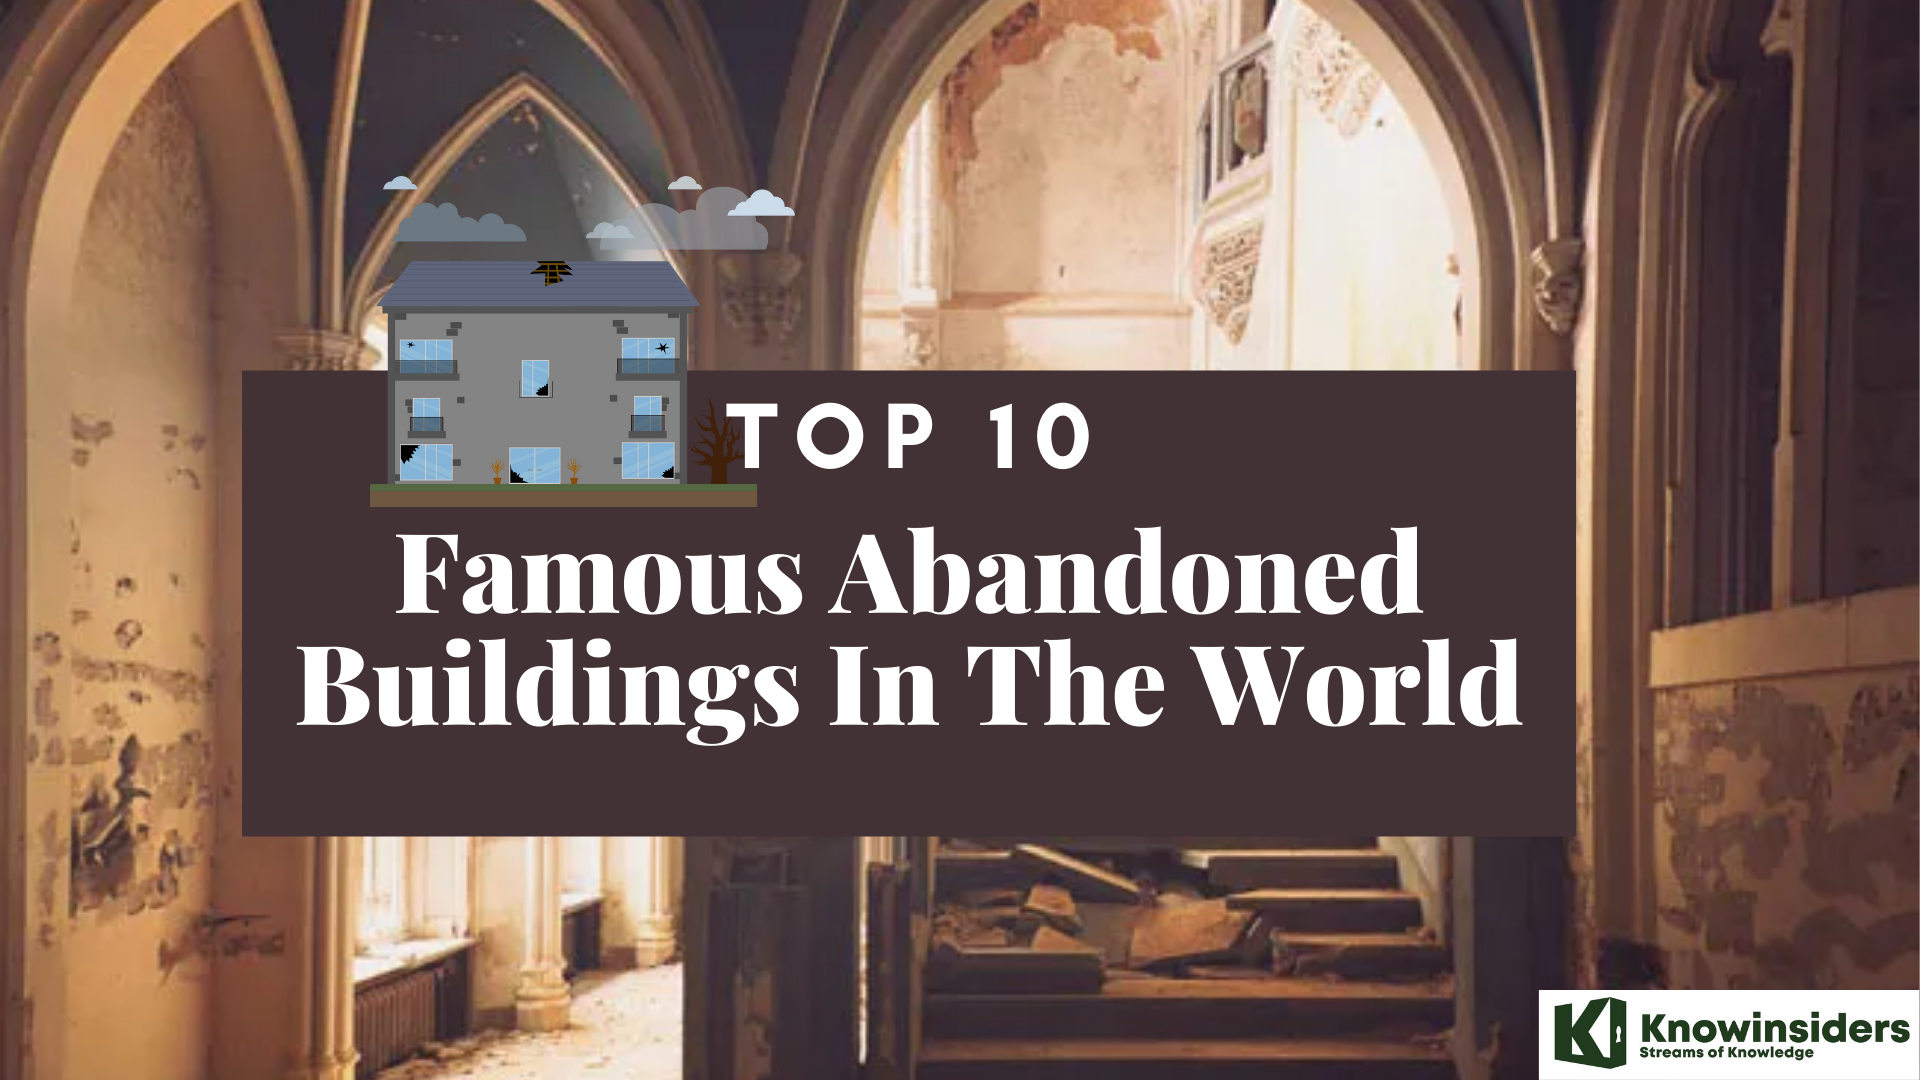 Top 10 famous abandoned buildings in the world. Photo: David Baker Photography 